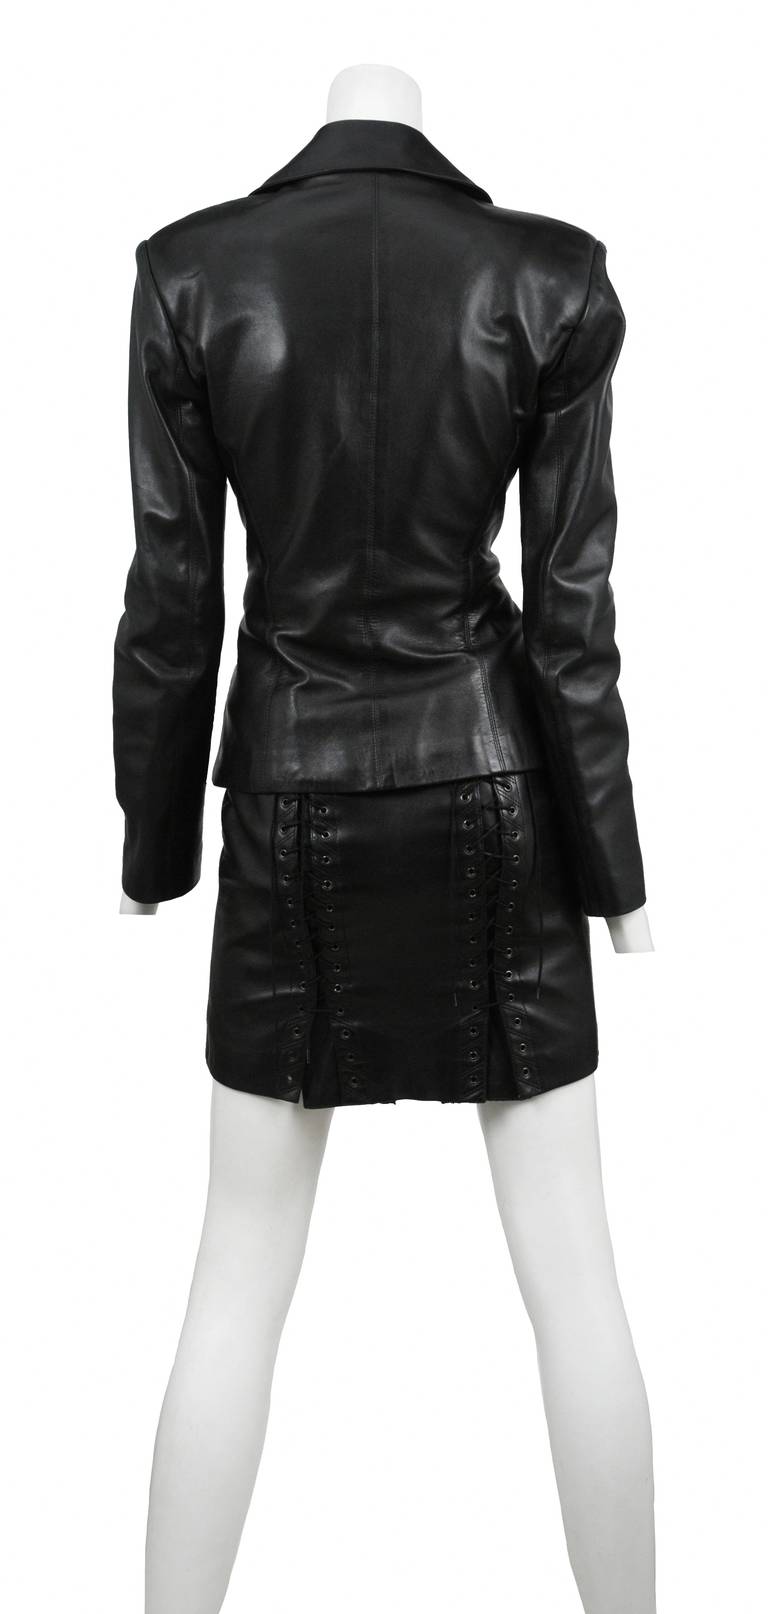 Butter soft black leather 2pc. With classic blazer jacket with signal button closure and fitted through waist. The skirt is a classic mini front and  vamping corset lace detail up both back seams.